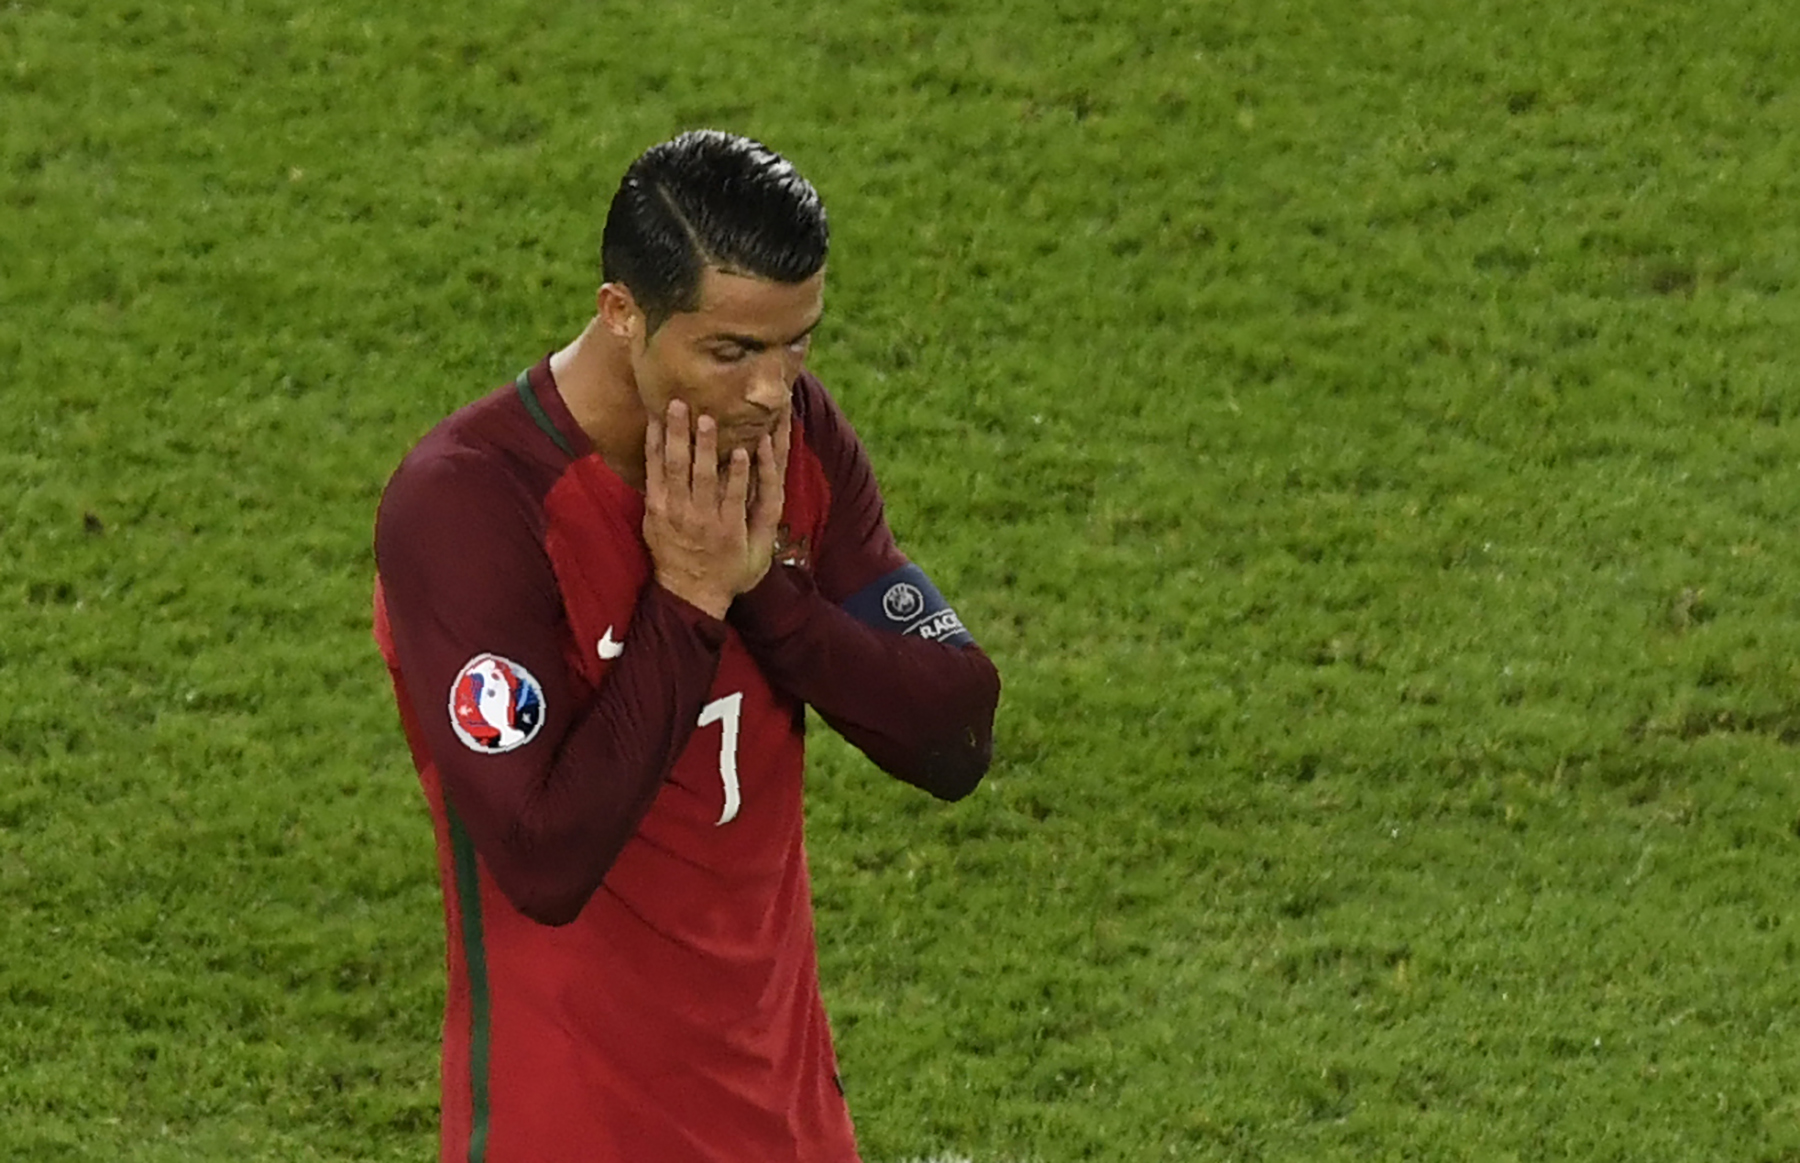 Portugal's forward Cristiano Ronaldo reacts after he missed to score a penalty during the Euro 2016 group F football match between Portugal and Austria at the Parc des Princes in Paris on June 18, 2016. / AFP / MIGUEL MEDINA        (Photo credit should read MIGUEL MEDINA/AFP/Getty Images)